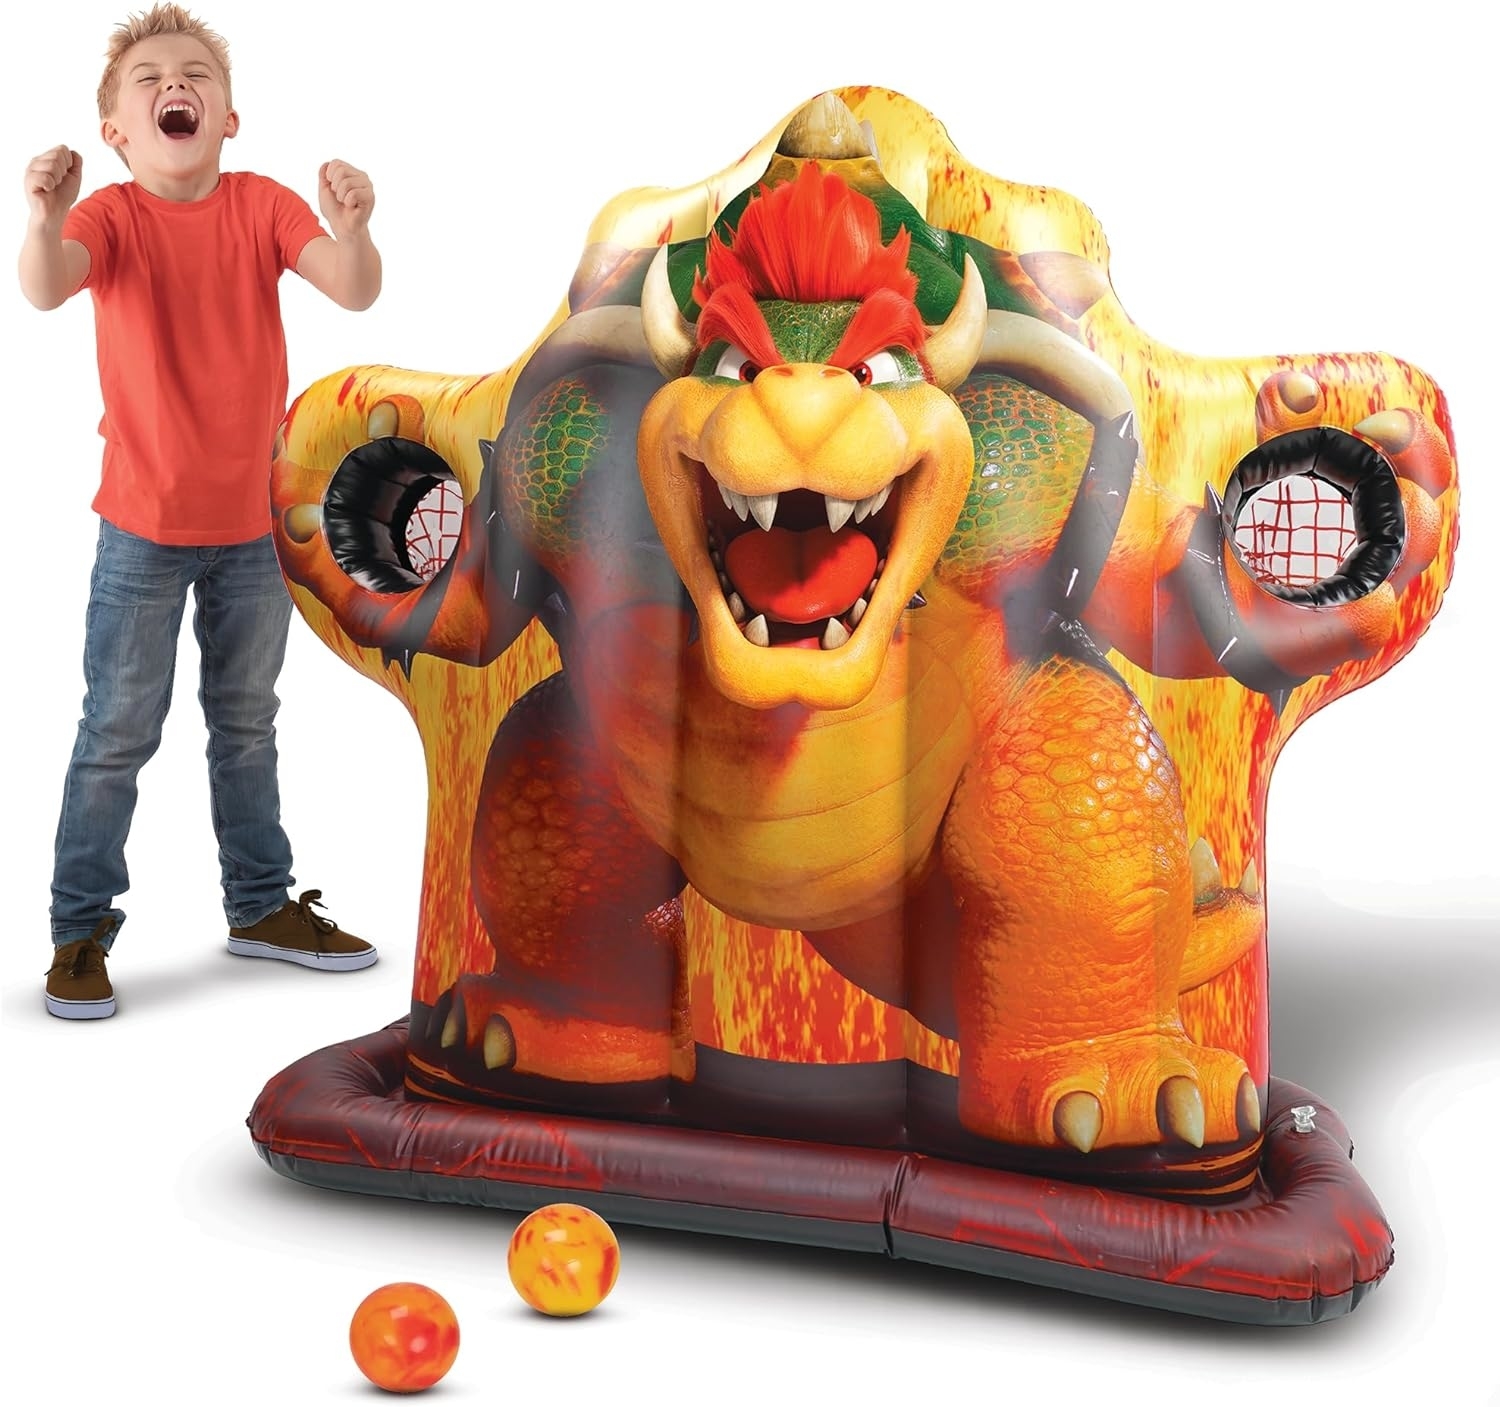 the inflatable ball game